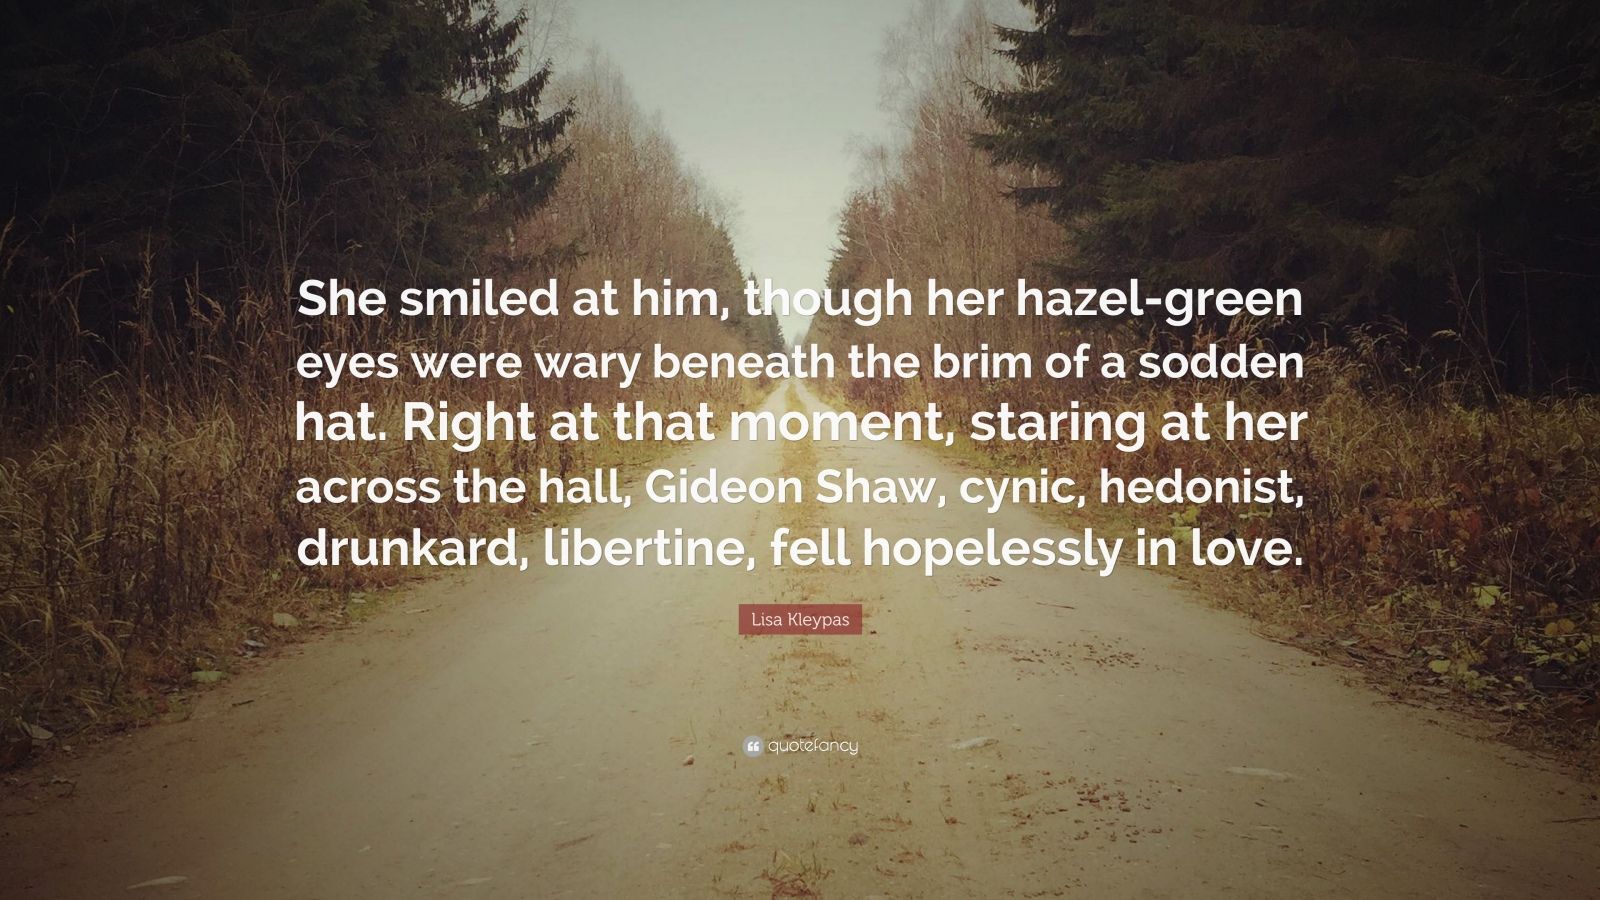 Lisa Kleypas Quote: "She smiled at him, though her hazel-green eyes were wary beneath the brim ...